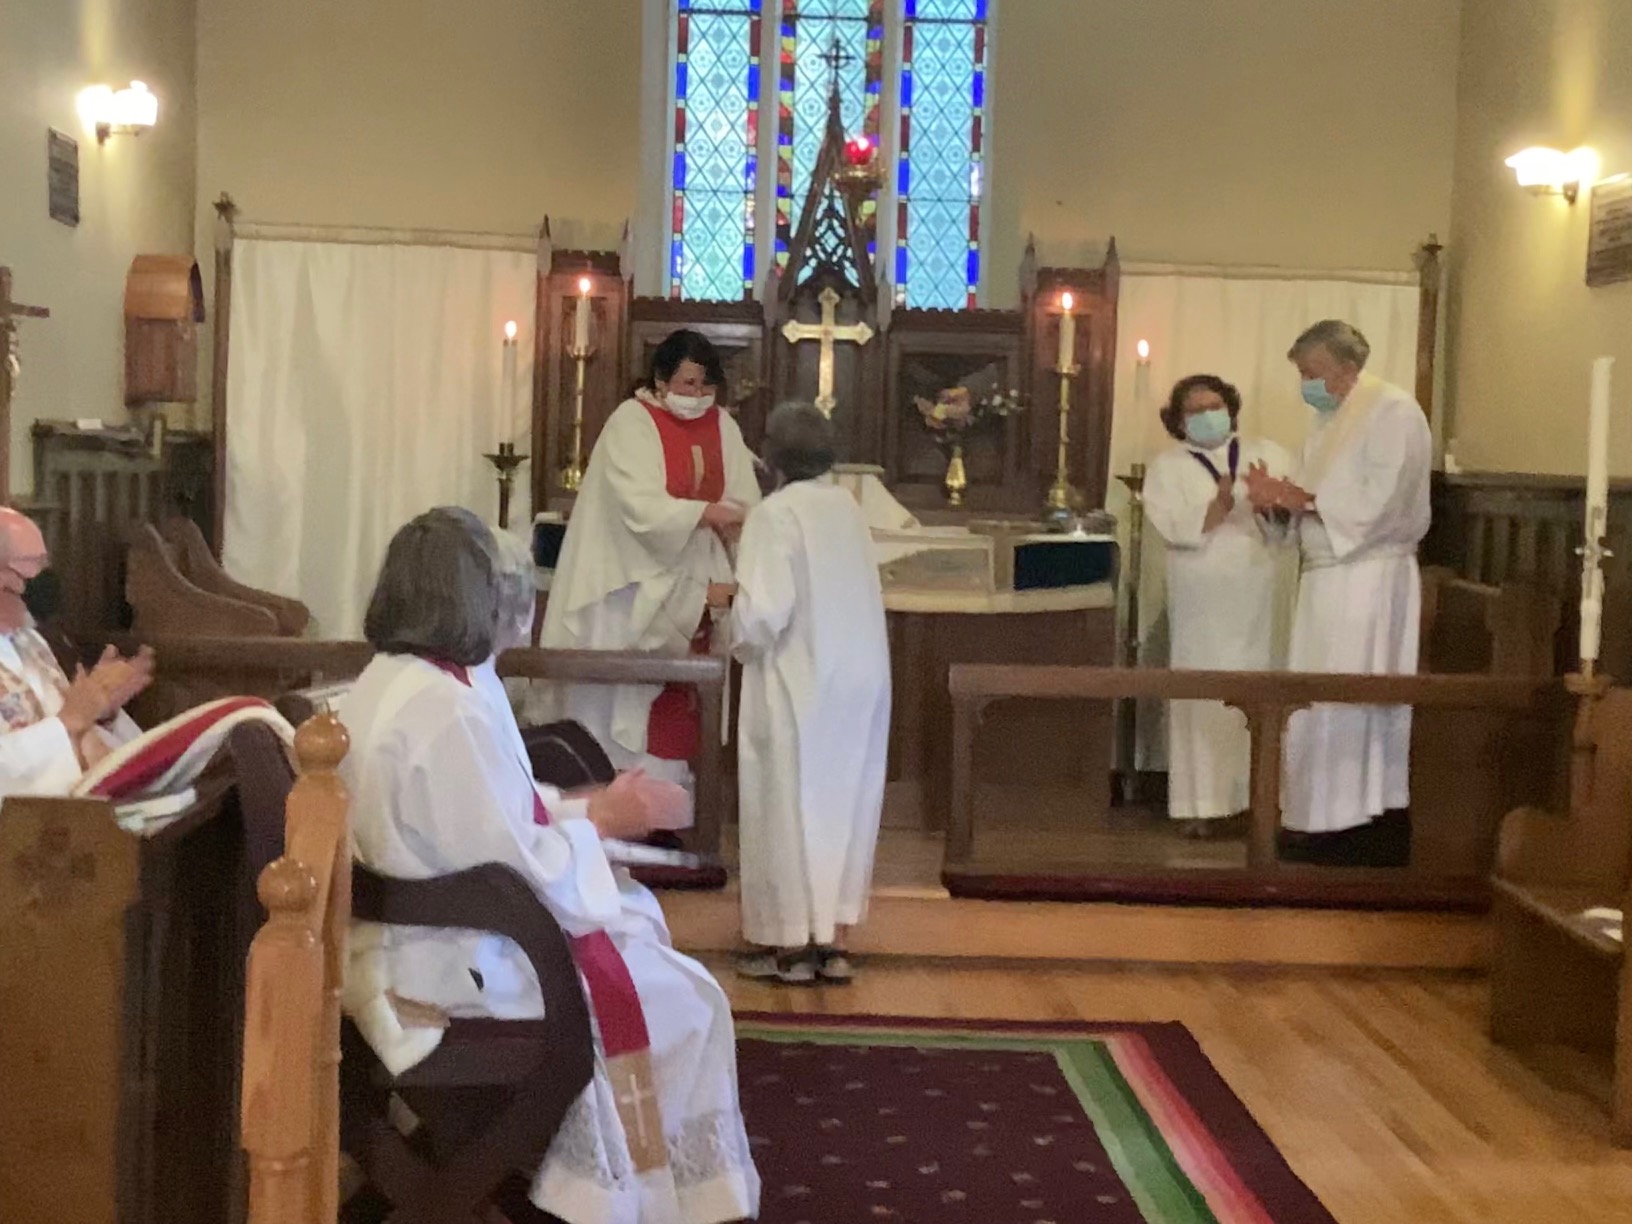 Celebration of New Ministry Service for Reverend Taunya Dawson as Rector of the Anglican Parish of Hubbards  - June 16, 2022